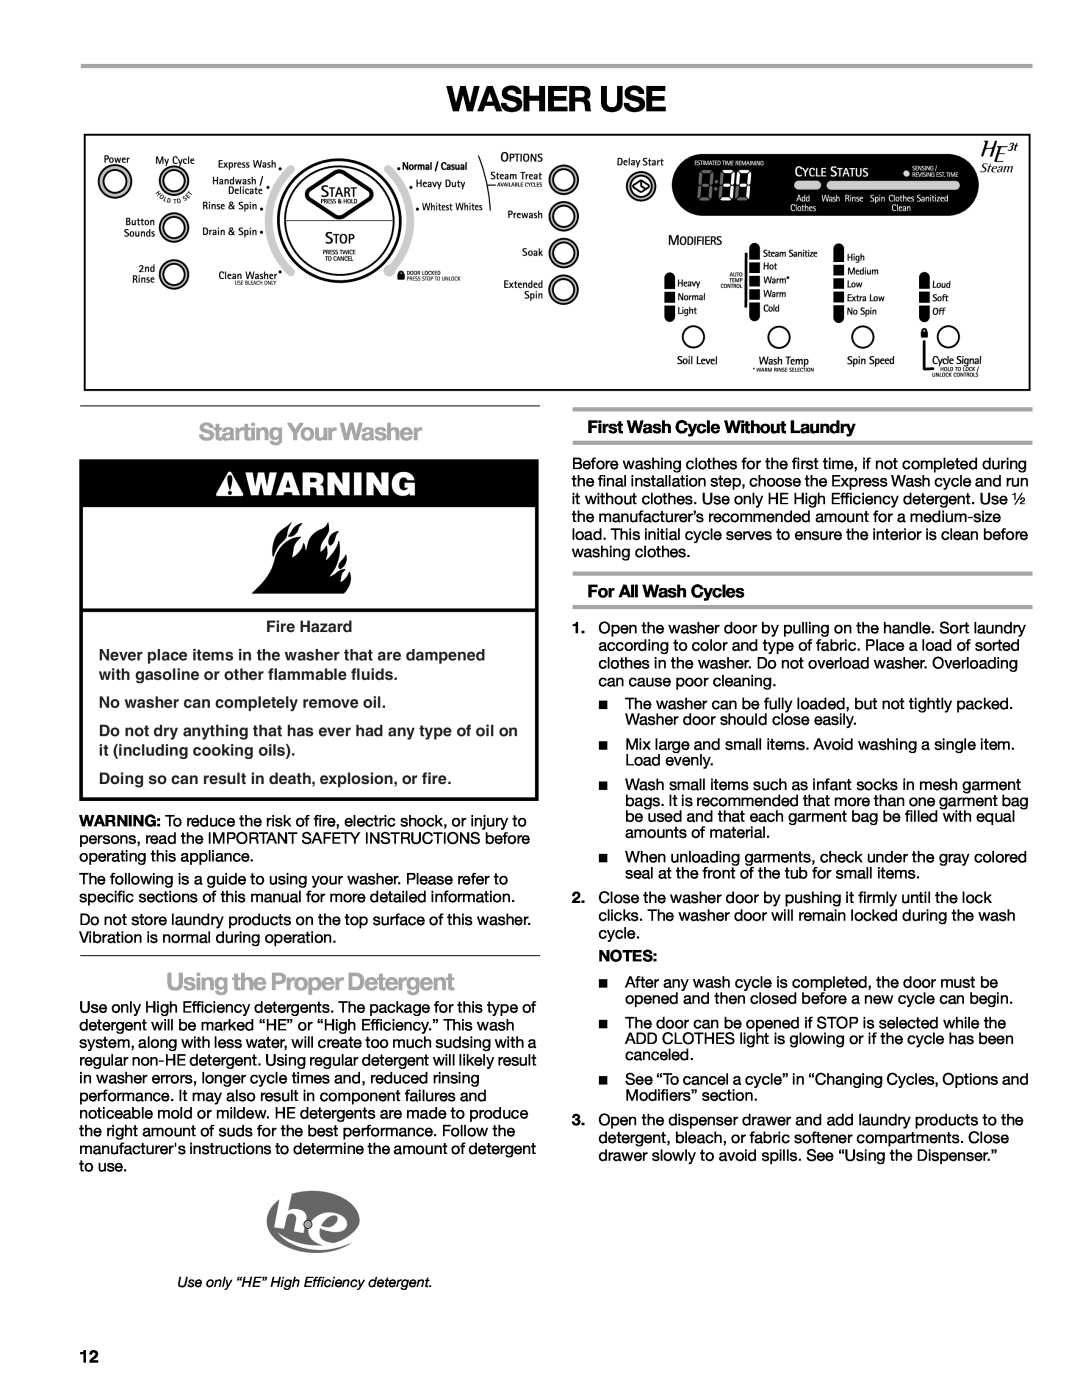 Kenmore W10133487A manual Washer Use, Starting Your Washer, Using the Proper Detergent, First Wash Cycle Without Laundry 